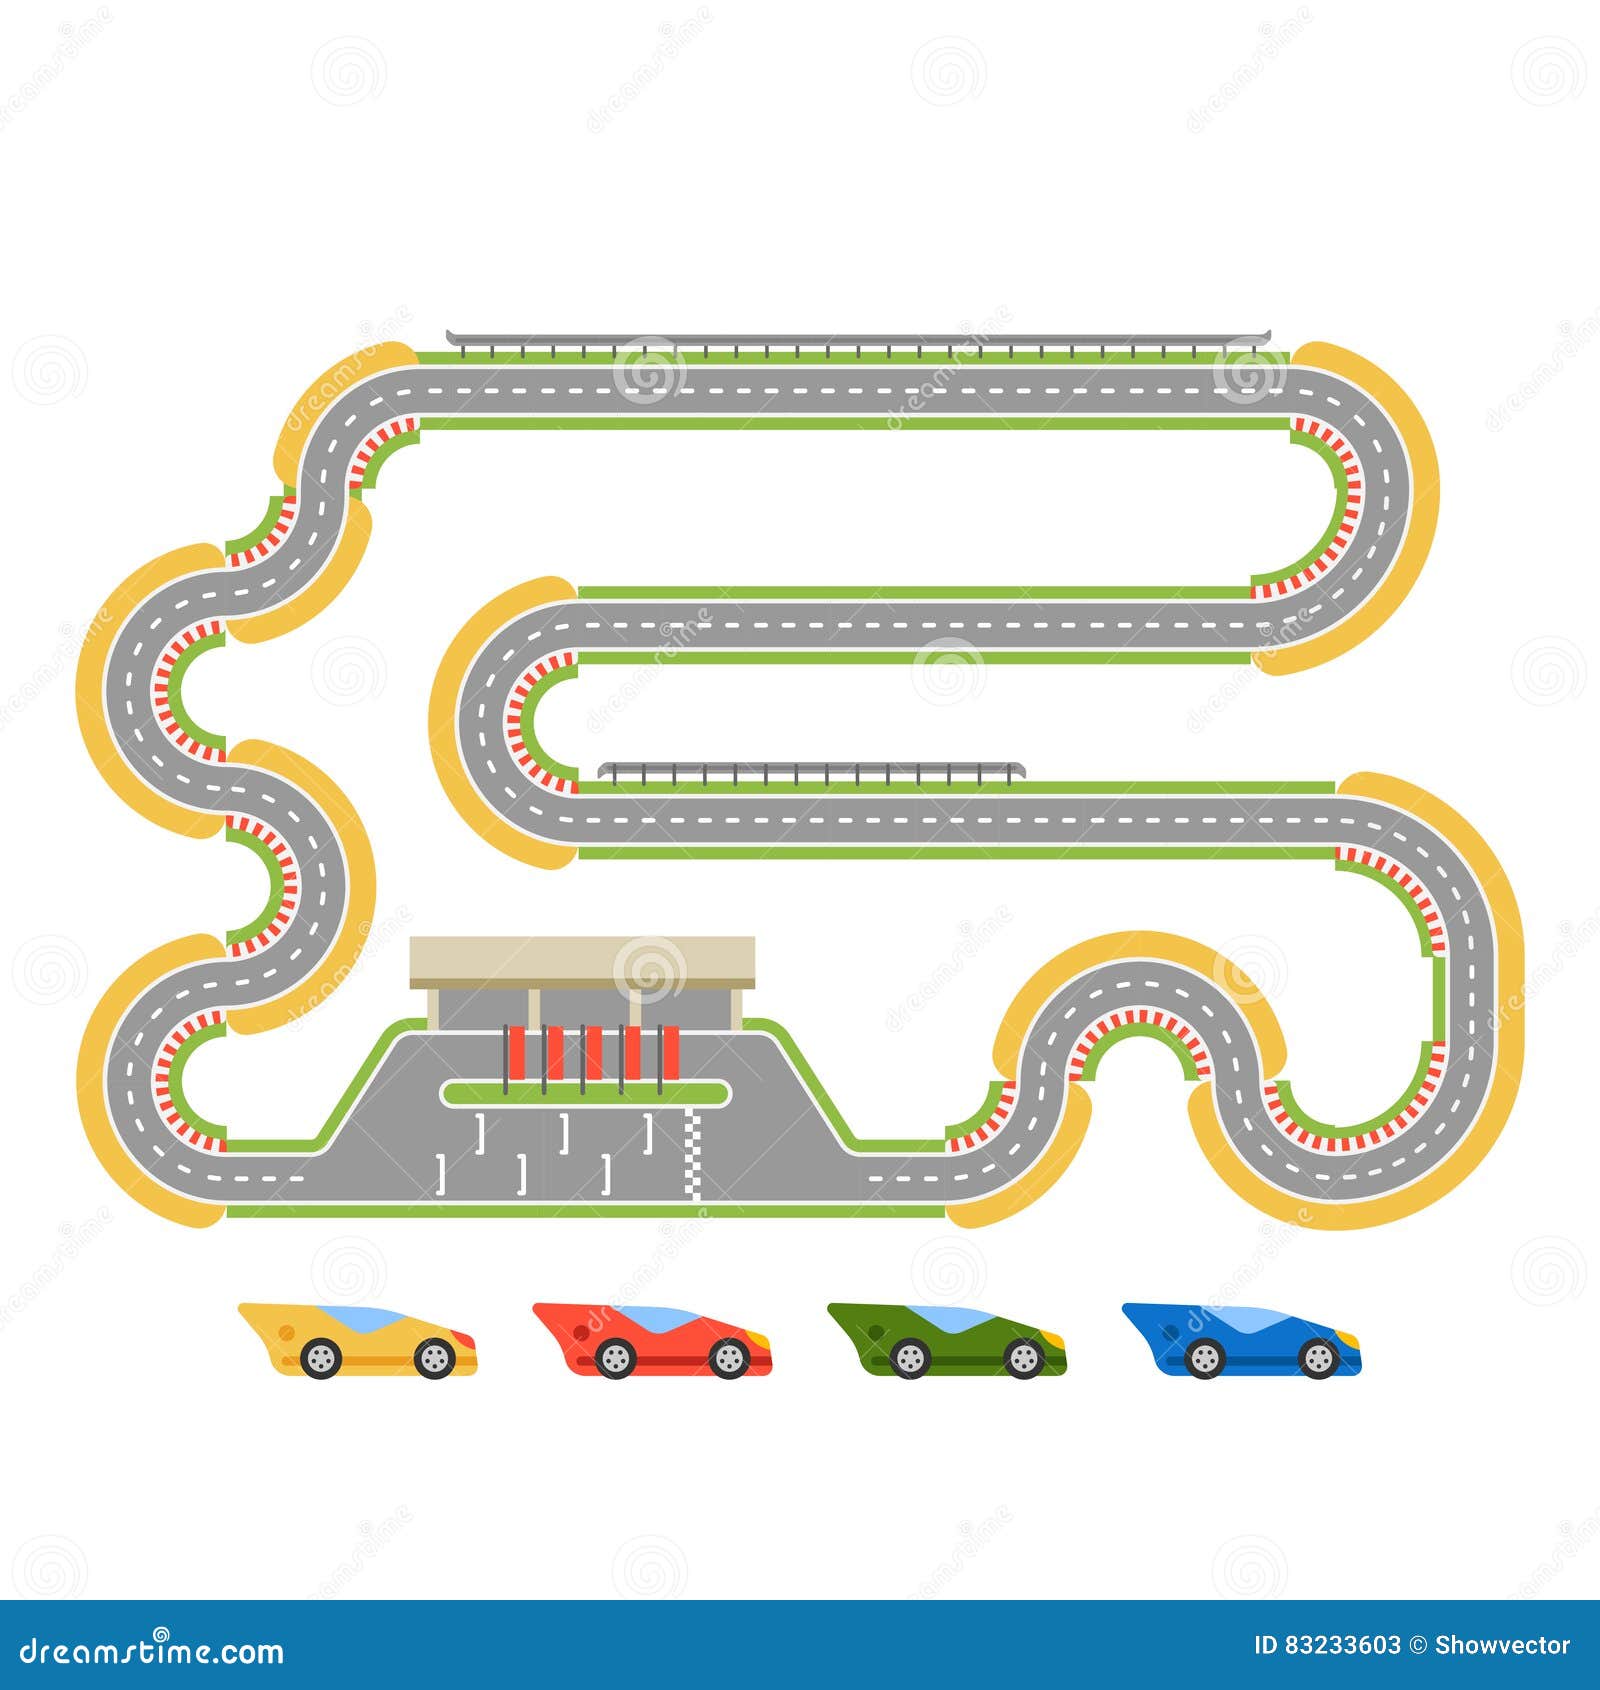 Race track outline